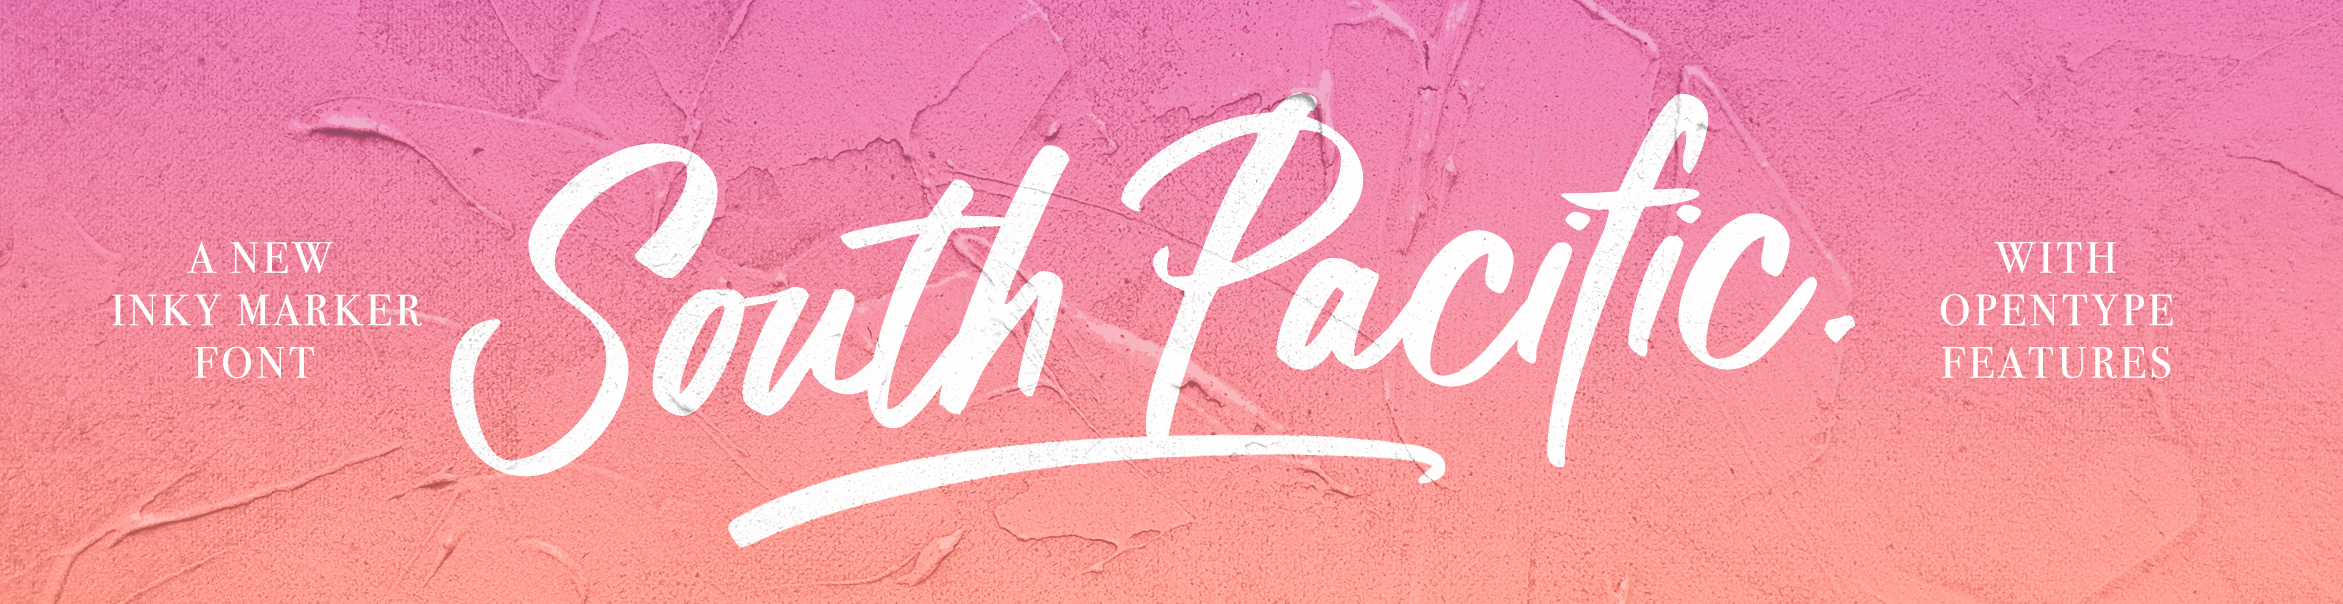 South Pacific font on pink textured background